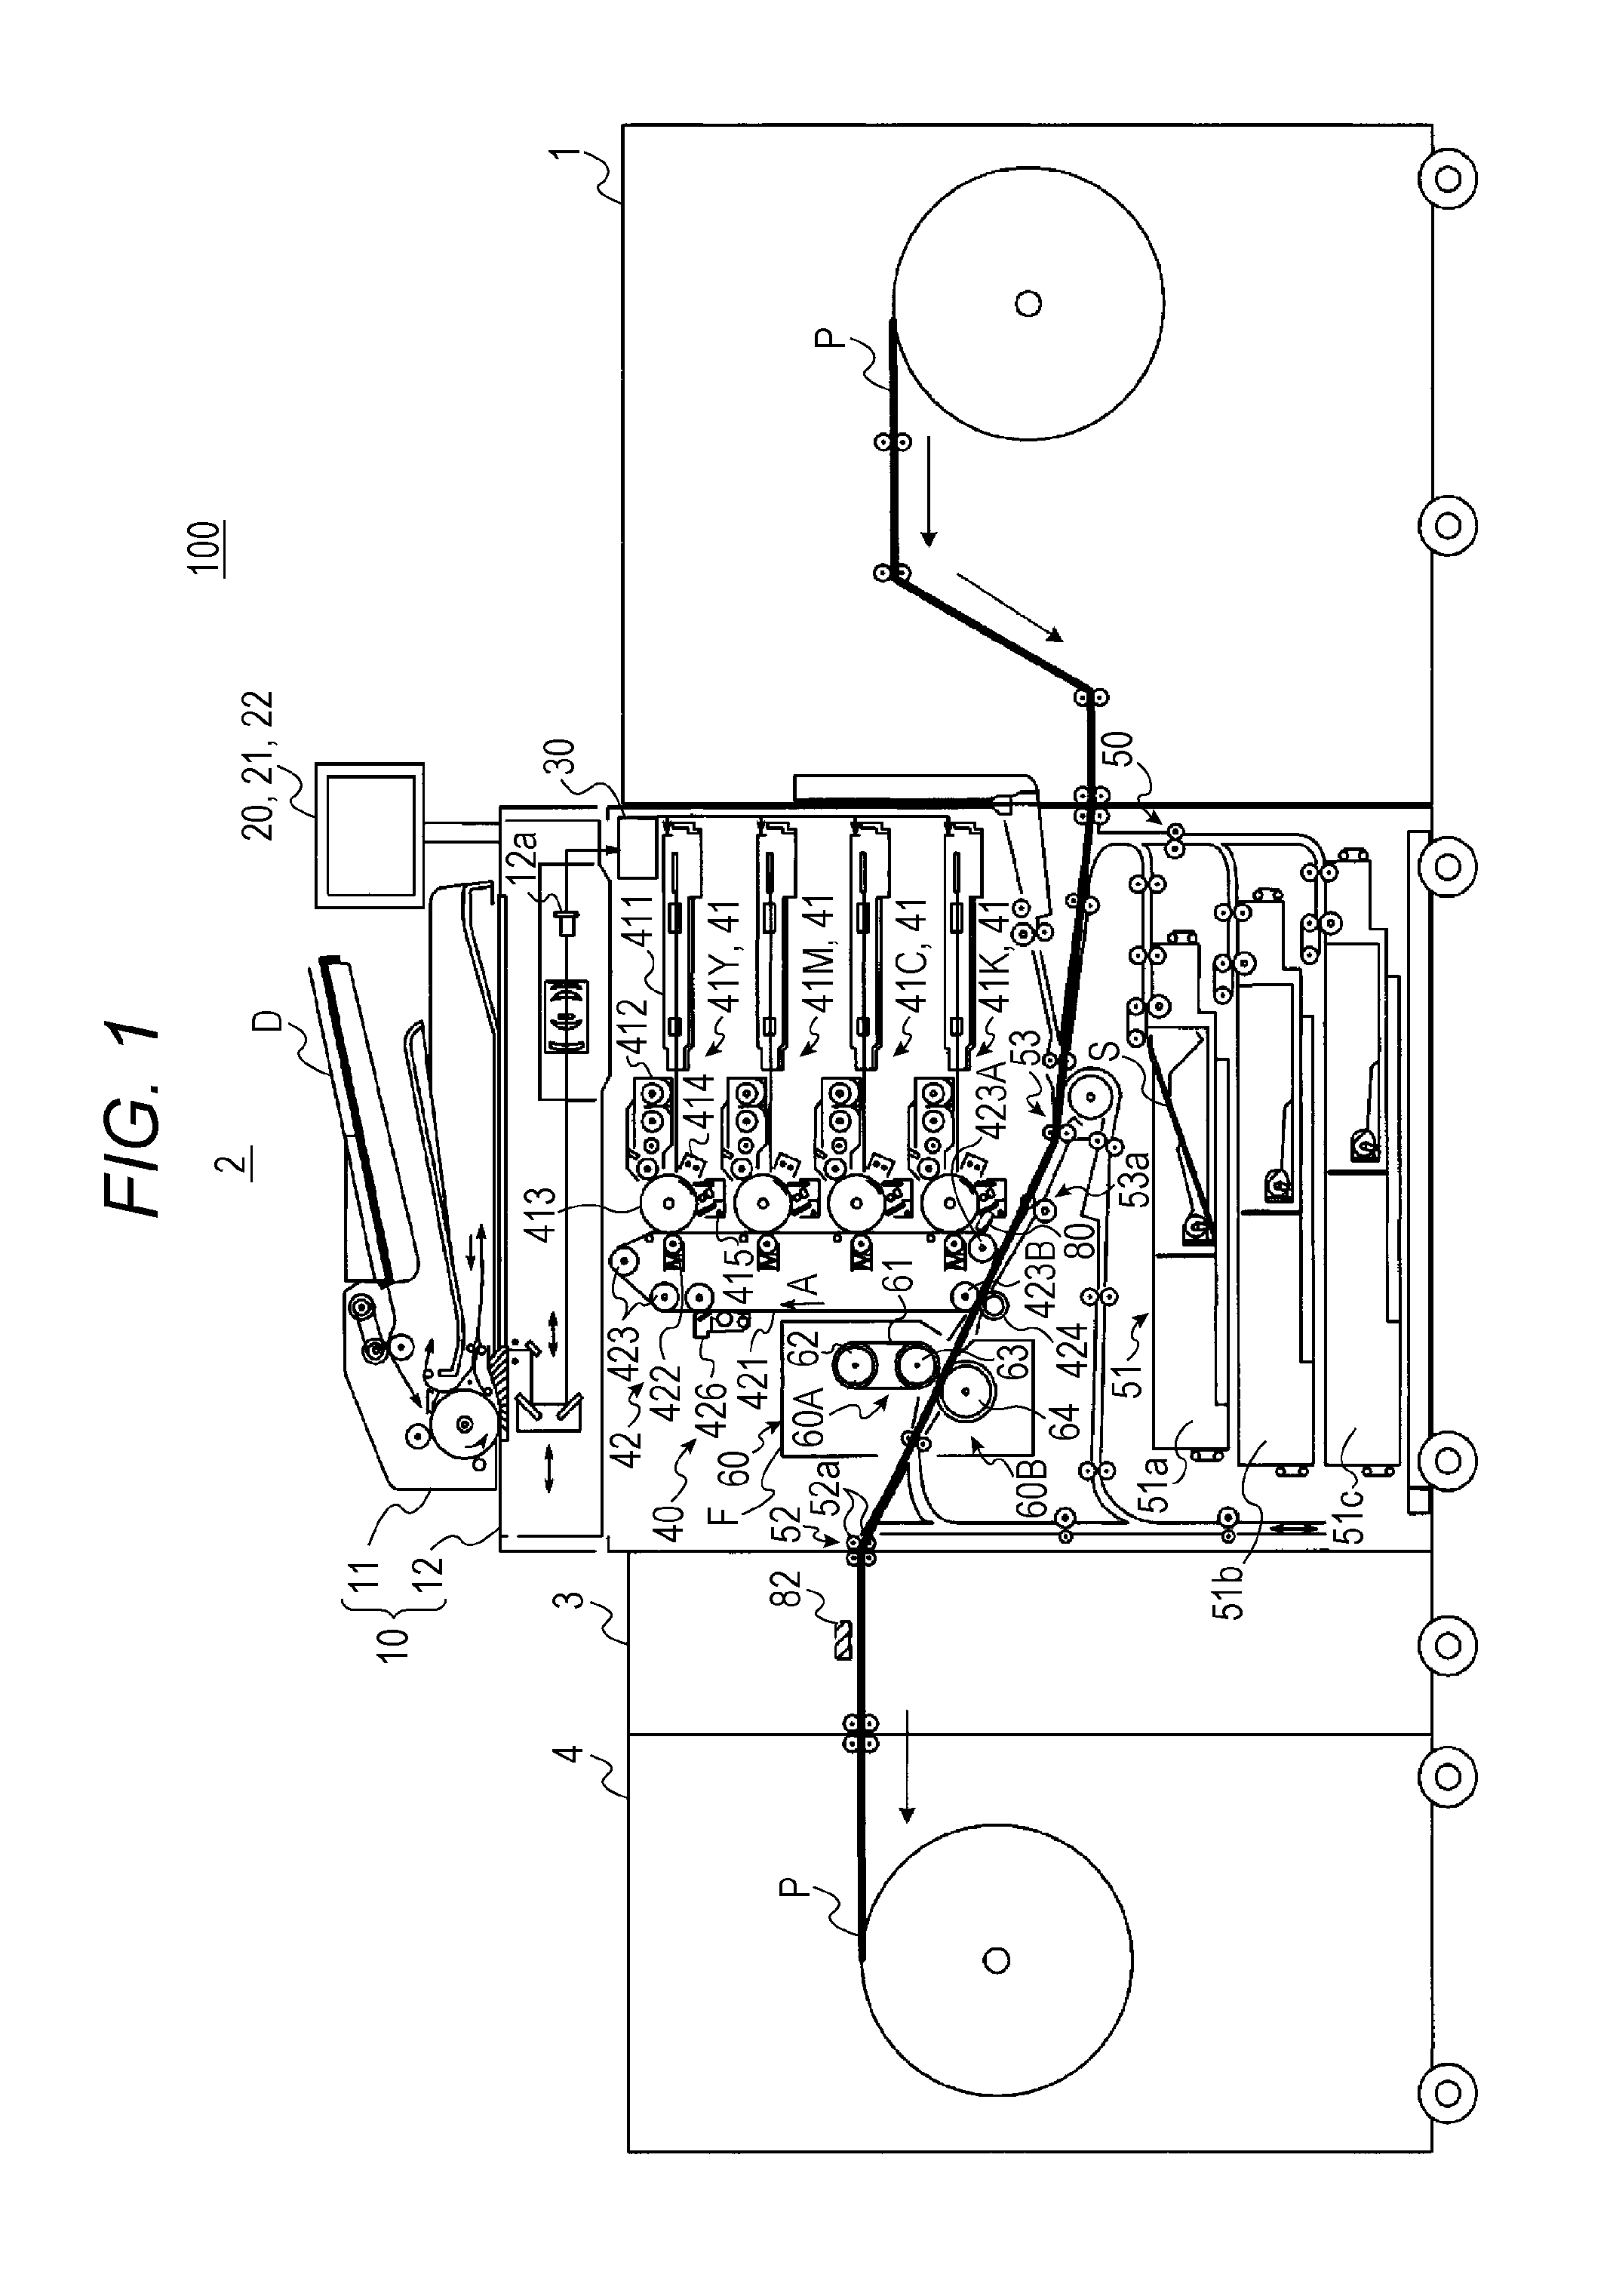 Image forming apparatus, image forming system and concentration unevenness detecting method